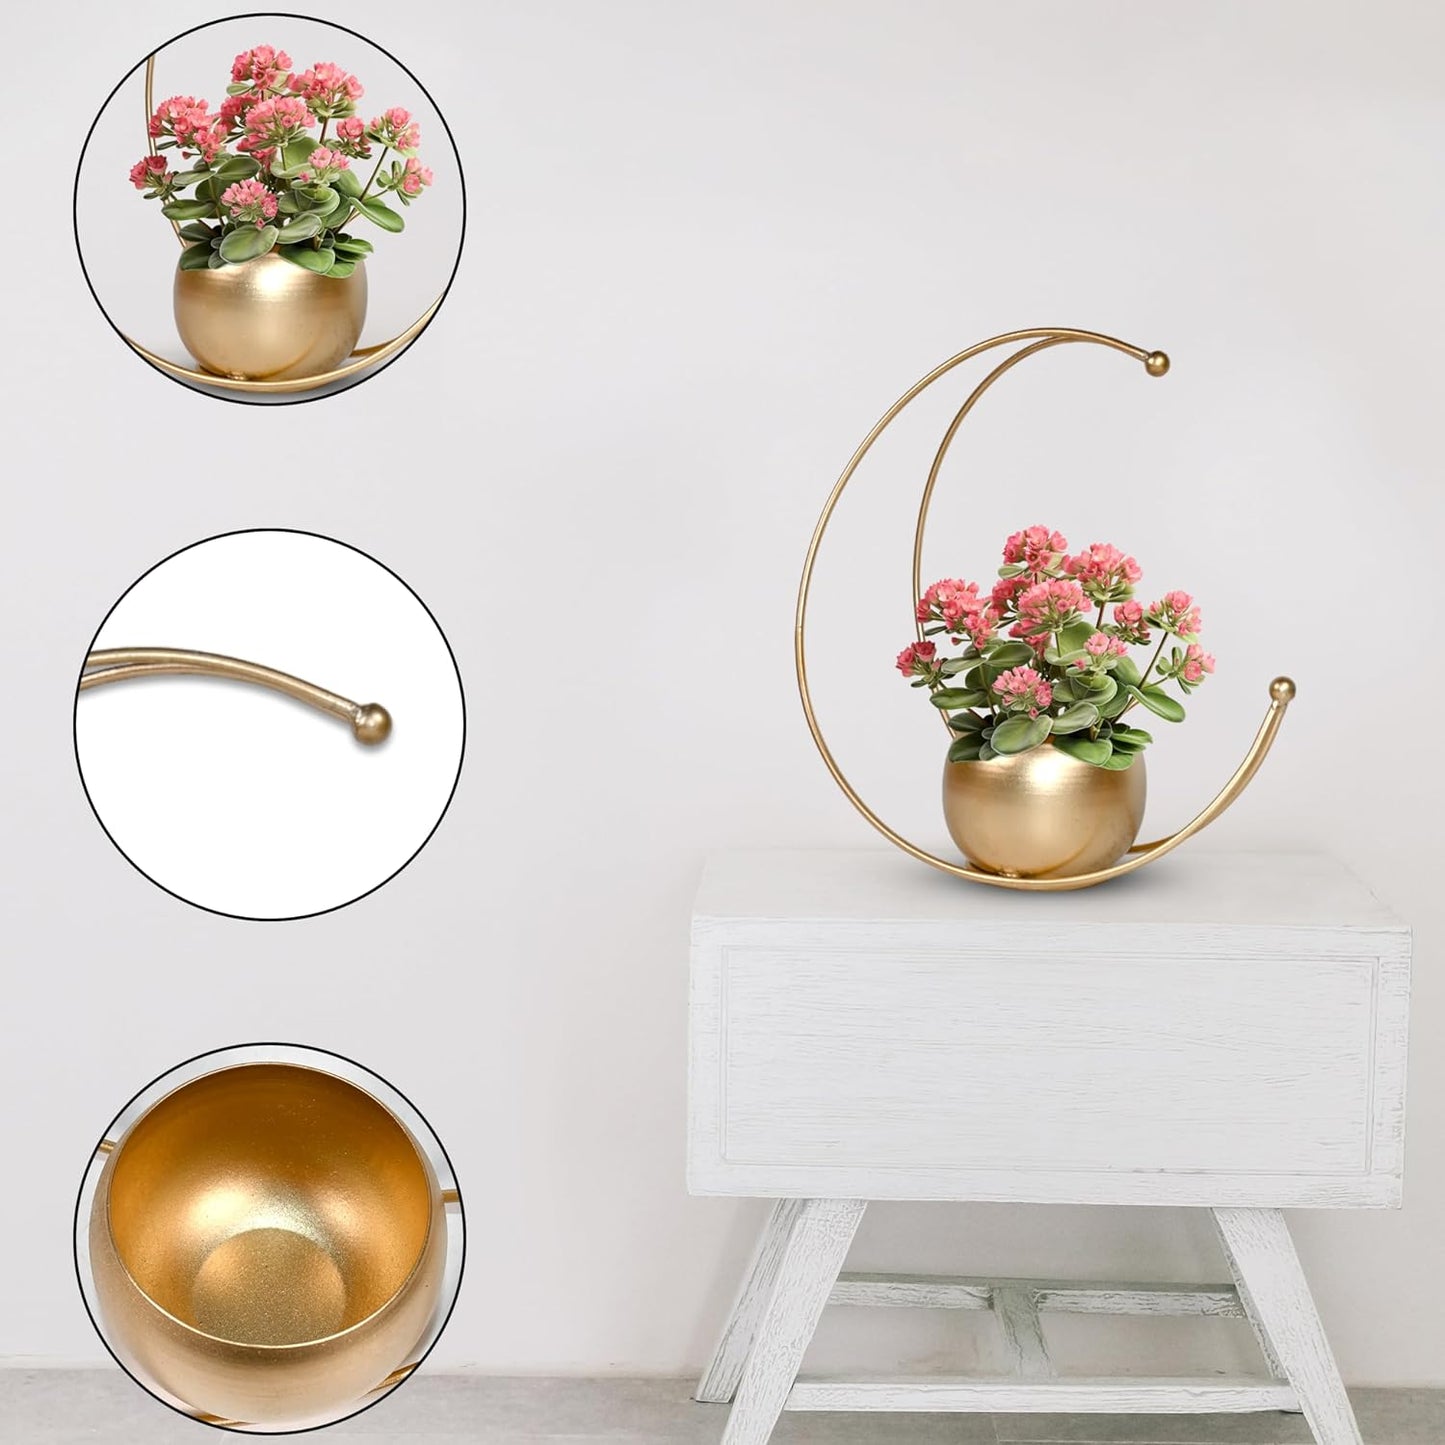 Metal Flower Vase with Gold Finish | Geometric Half Moon Design Flower Pot Stand | Table Top Decorative Flower Pot | Gold Metal Flower Vase for Home and Office Side Table Decoration